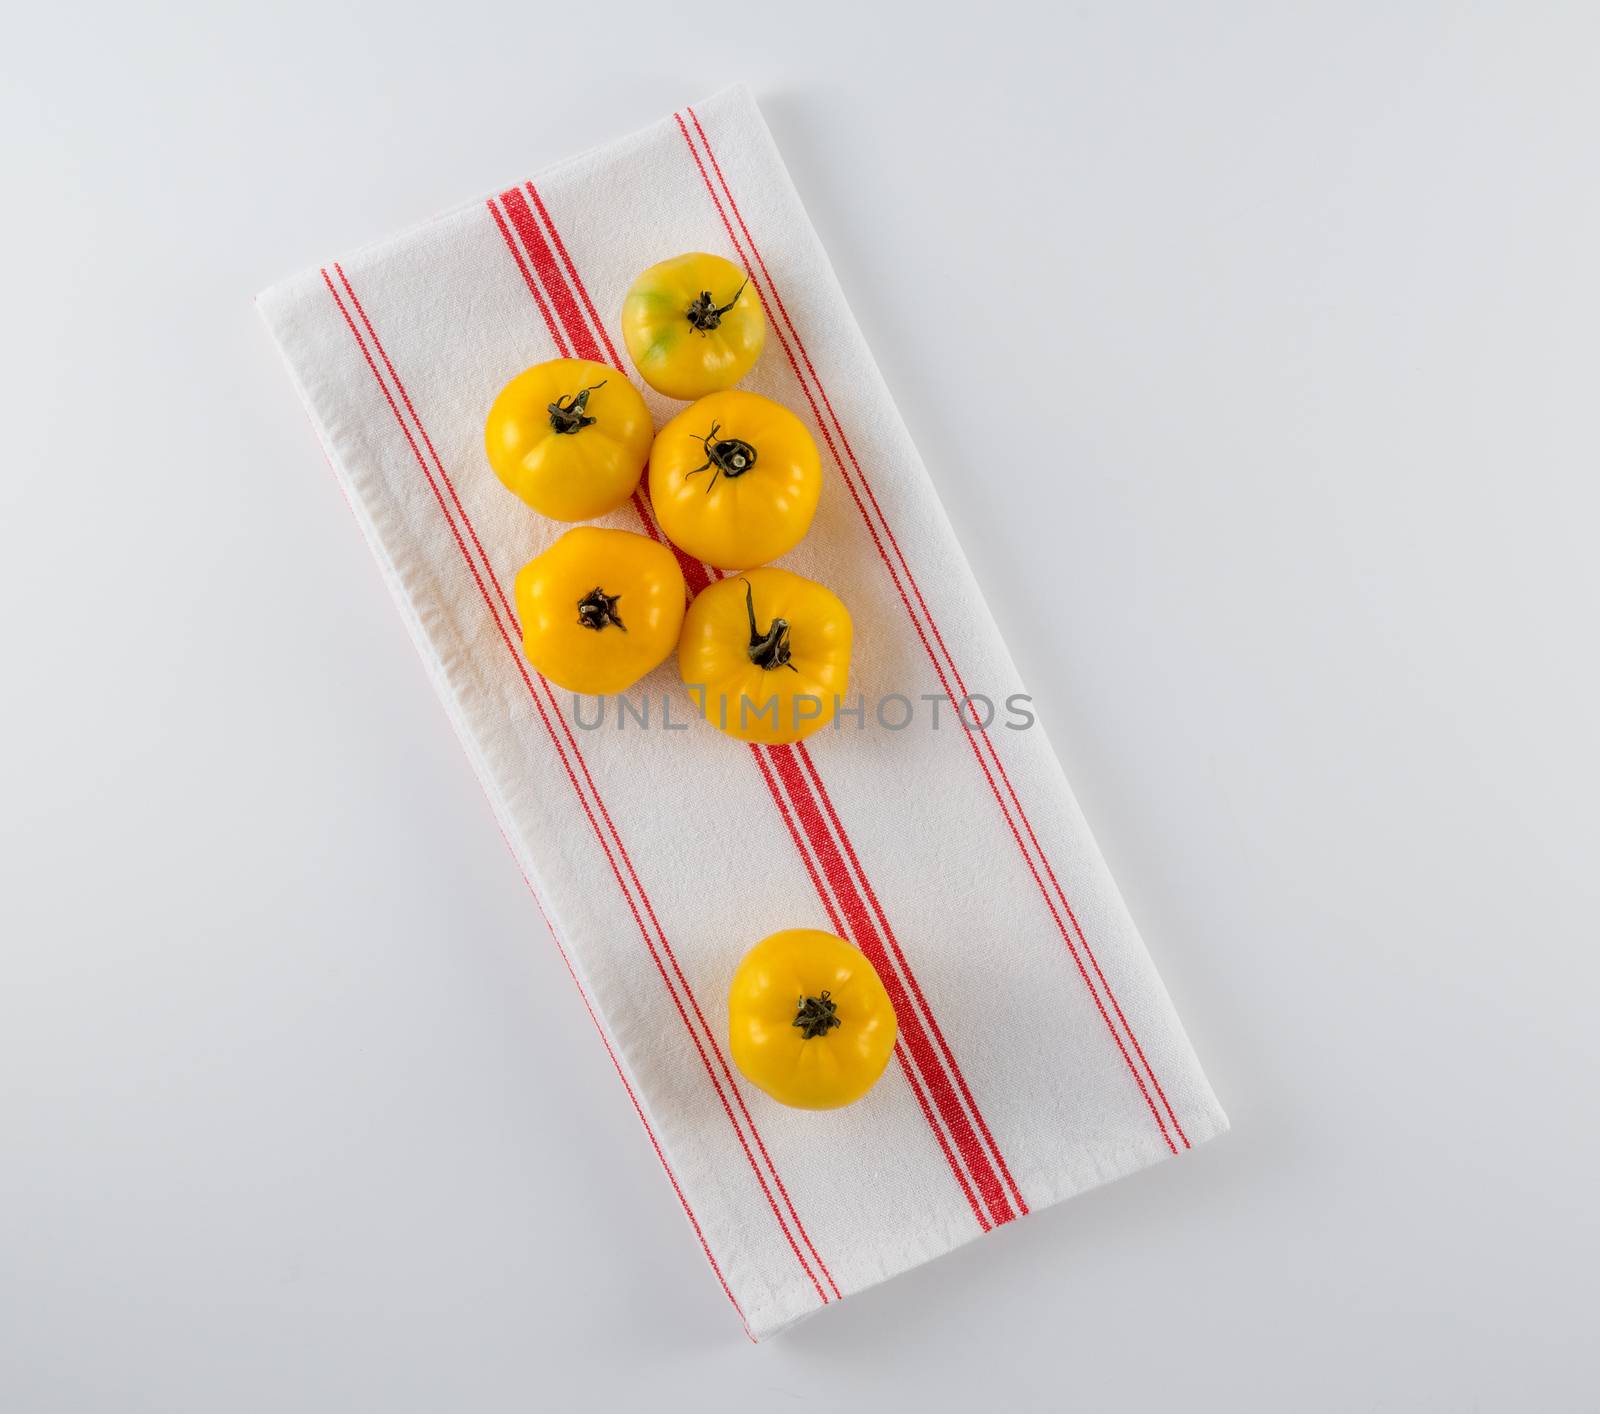 Yellow Heirloom Tomatoes on French Towel by krisblackphotography